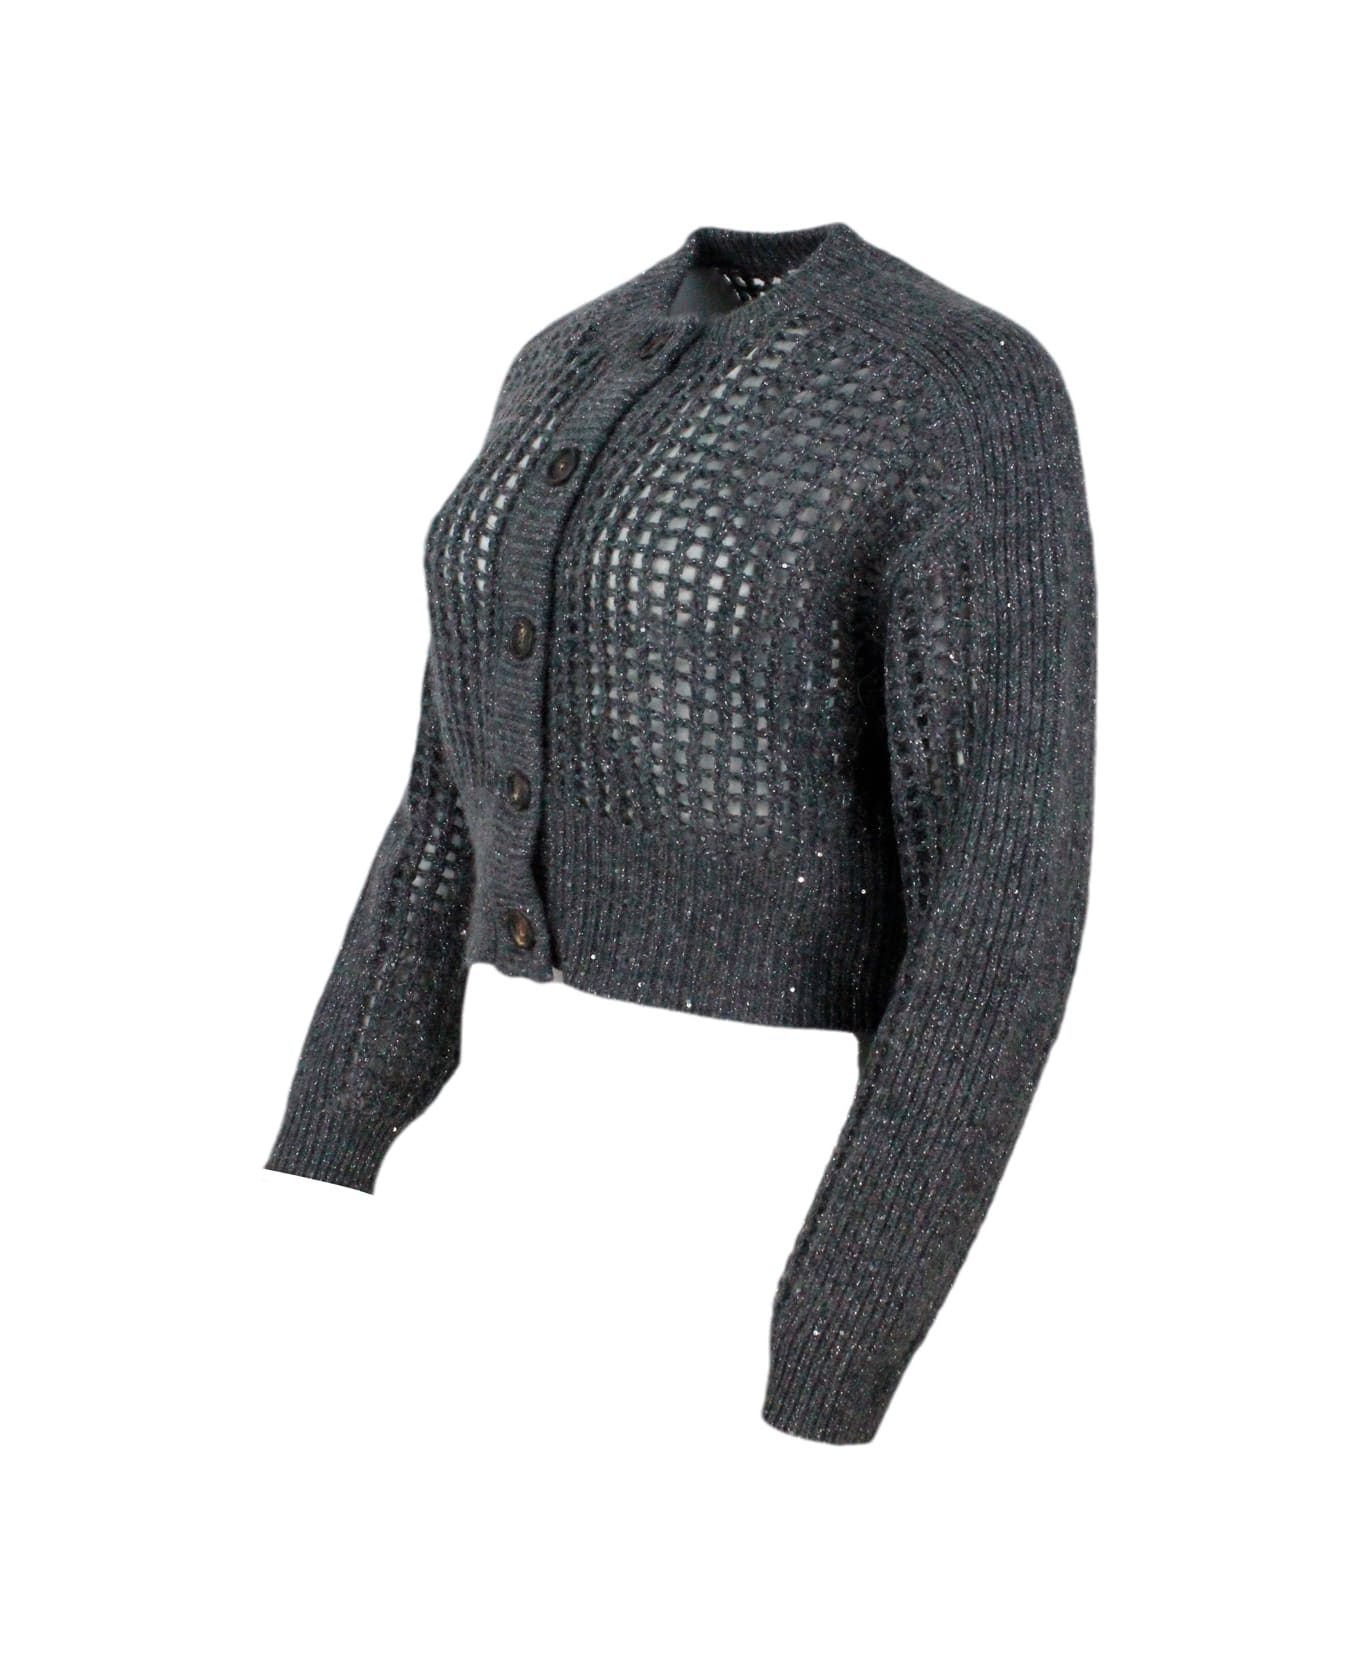 Brunello Cucinelli Long-sleeved Mesh Cardigan Sweater In Fine Wool, Cashmere And Mohair Embellished With Lamè Yarn For Shiny Reflections. Slightly Cropped Cut - Grey カーディガン